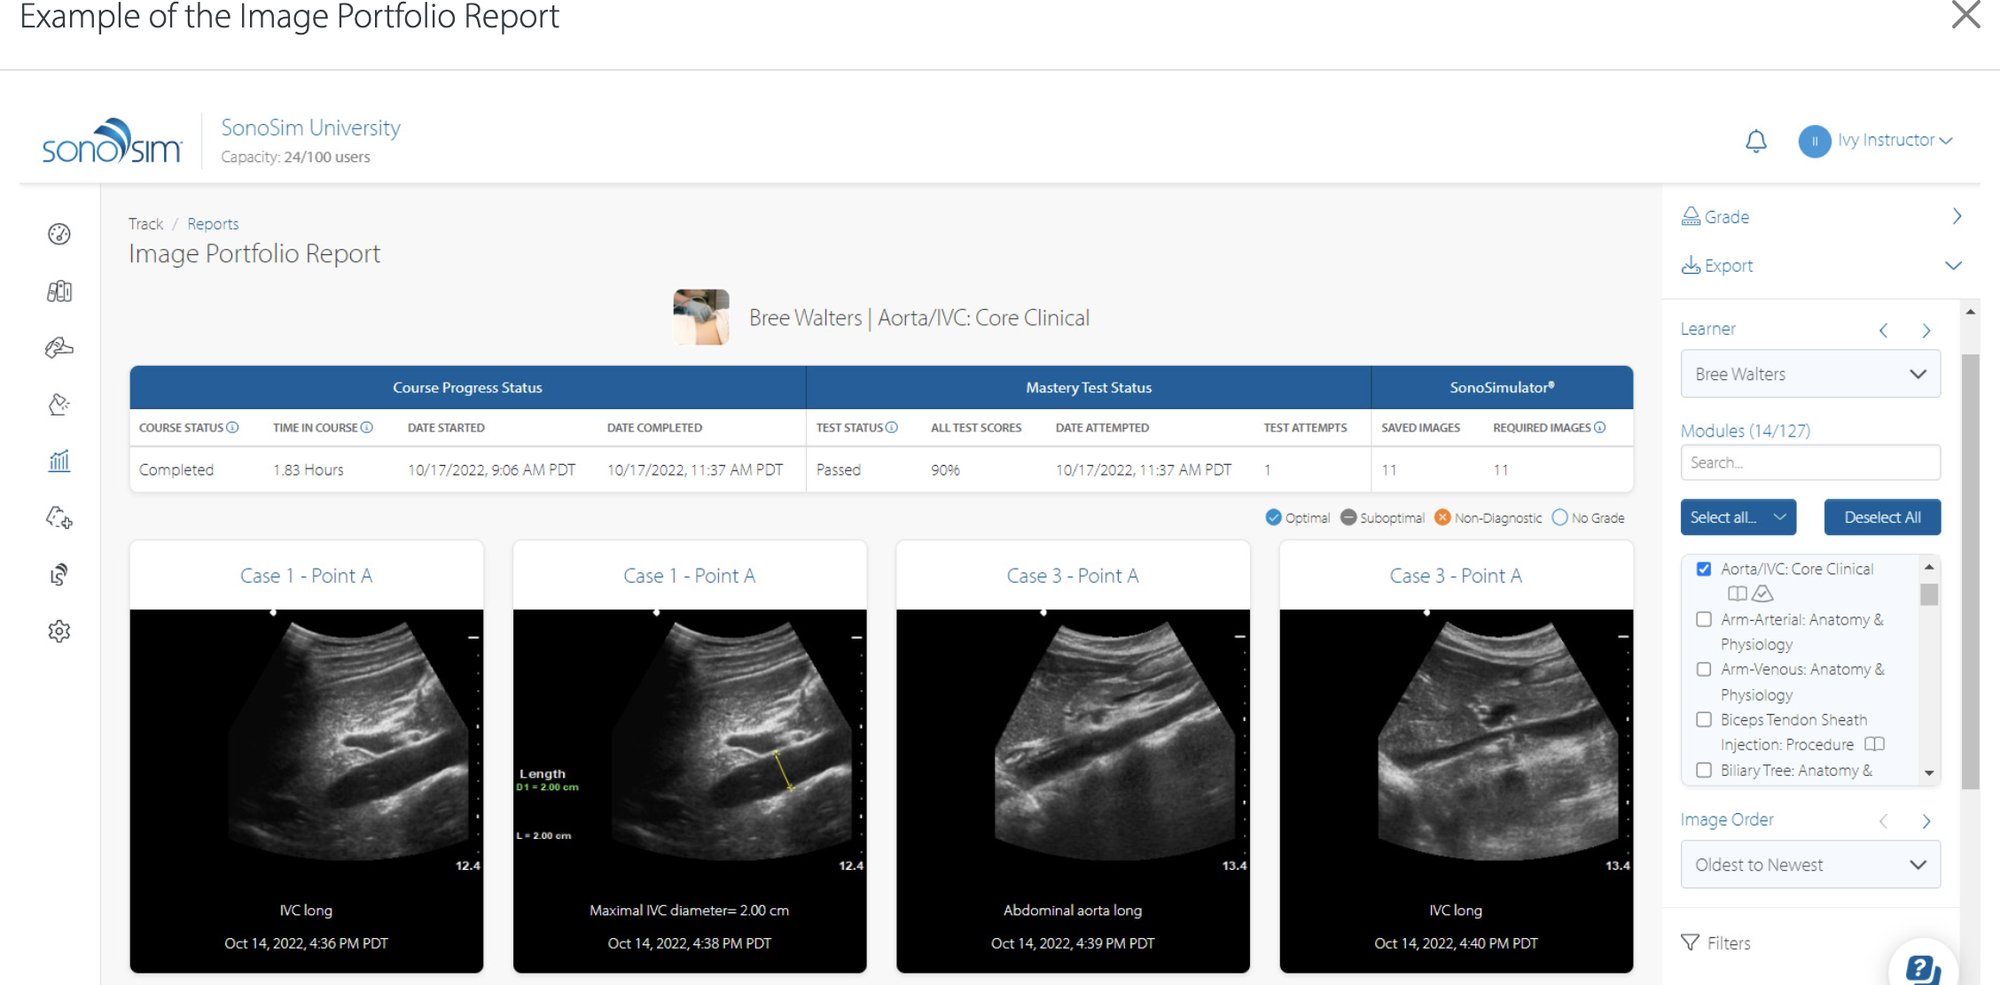 SonoSim Performance Tracker contains image reports as shown